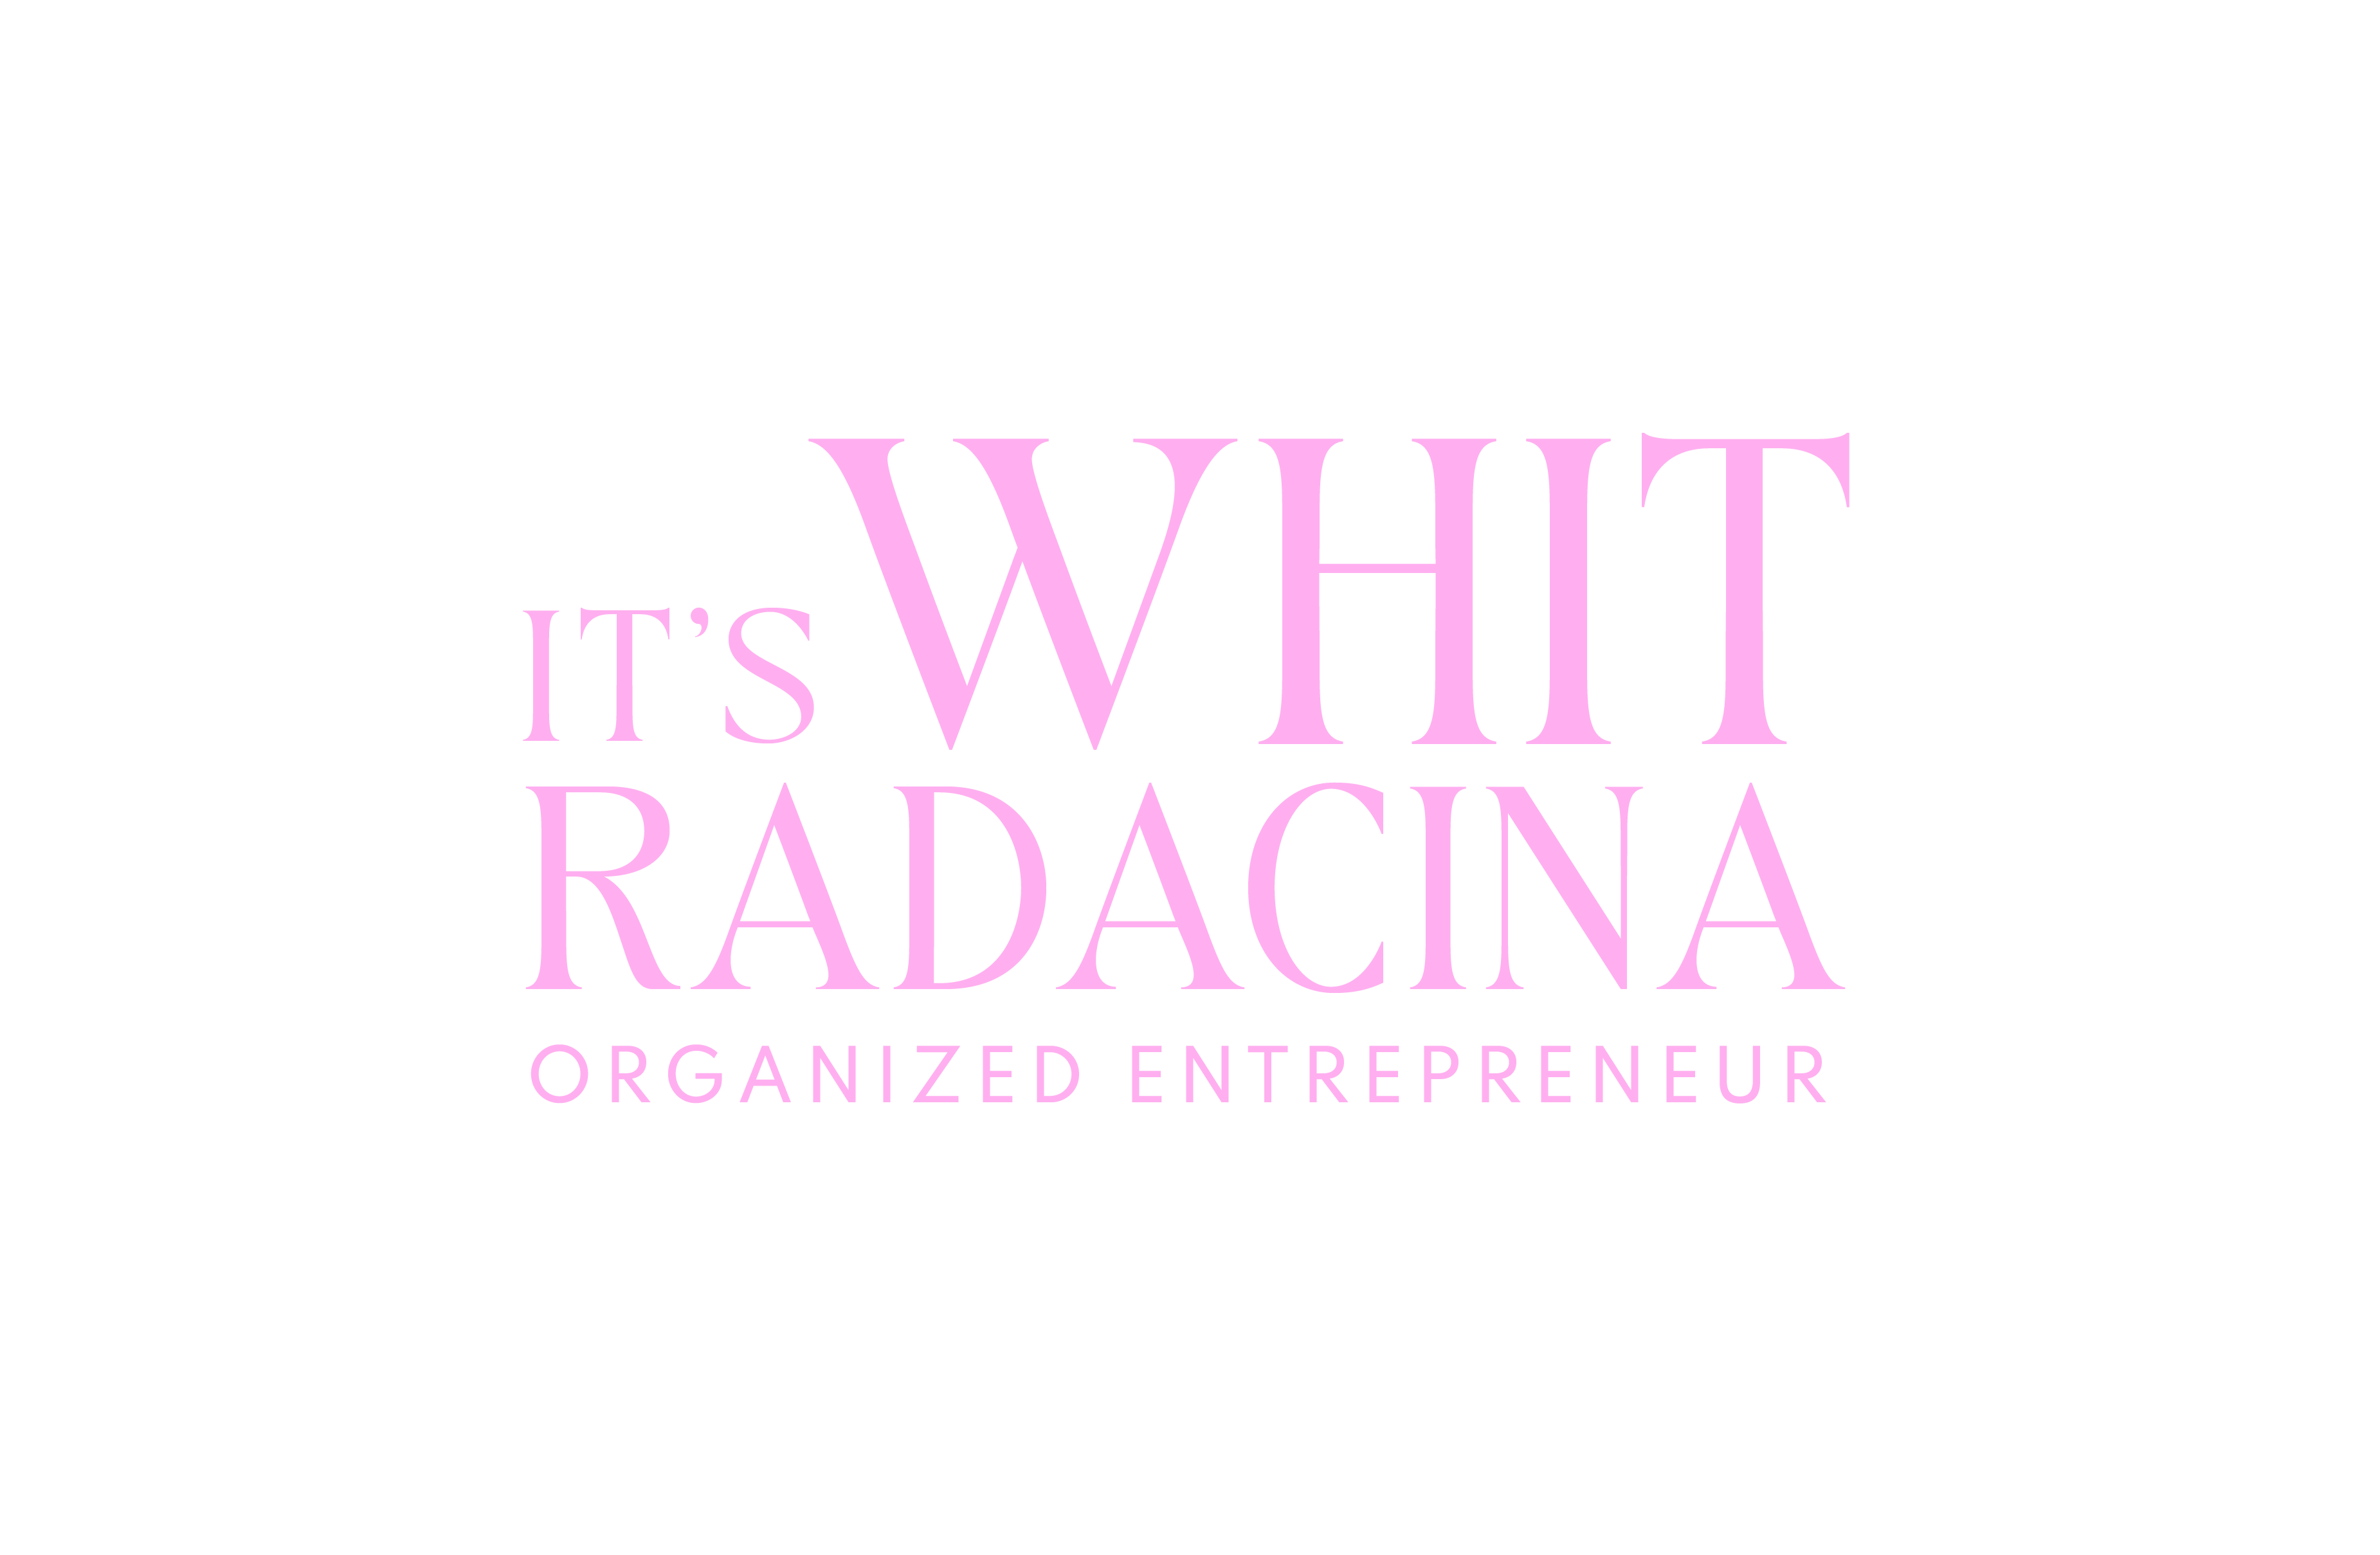 Earn More Money and Work Less Hours - It's Whit Radacina